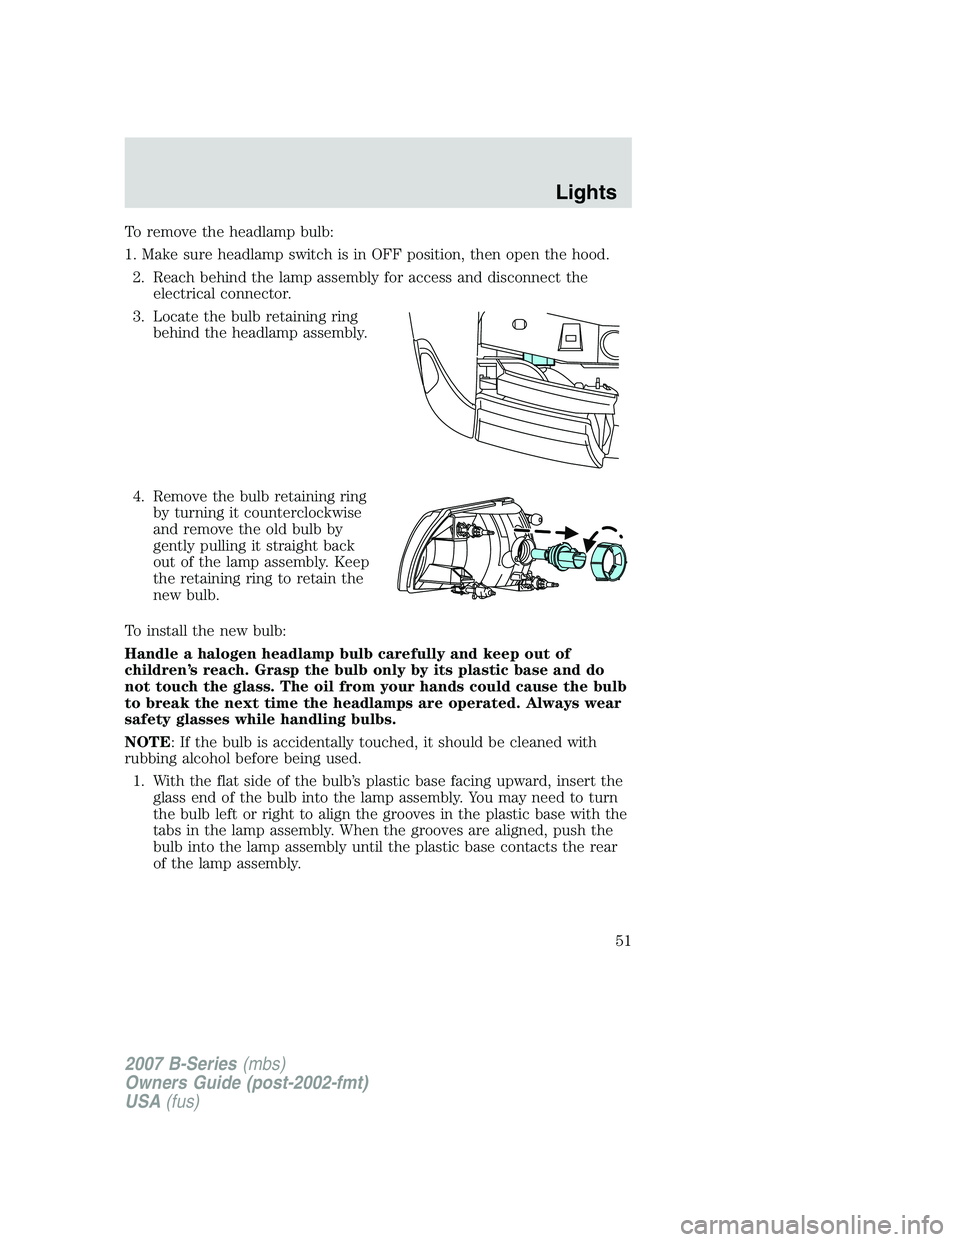 MAZDA MODEL B3000 TRUCK 2007  Owners Manual To remove the headlamp bulb:
1. Make sure headlamp switch is in OFF position, then open the hood.2. Reach behind the lamp assembly for access and disconnect the electrical connector.
3. Locate the bul